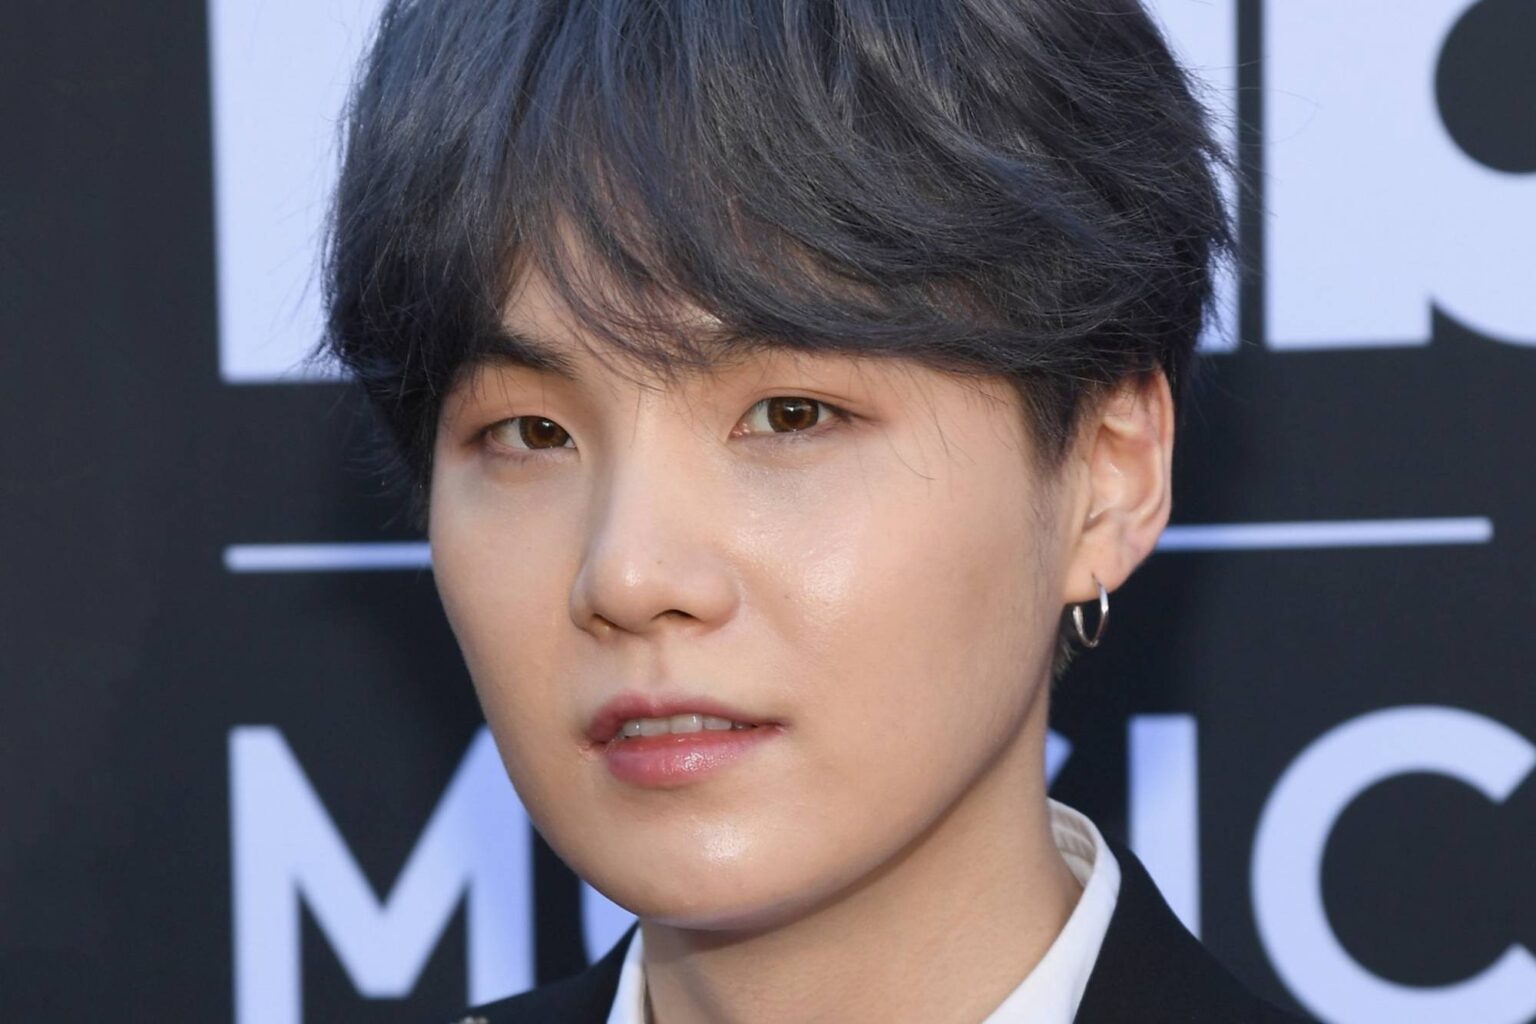 Suga is one of the most popular members of BTS. Find out what makes the K-pop superstar so irresistible to fans.